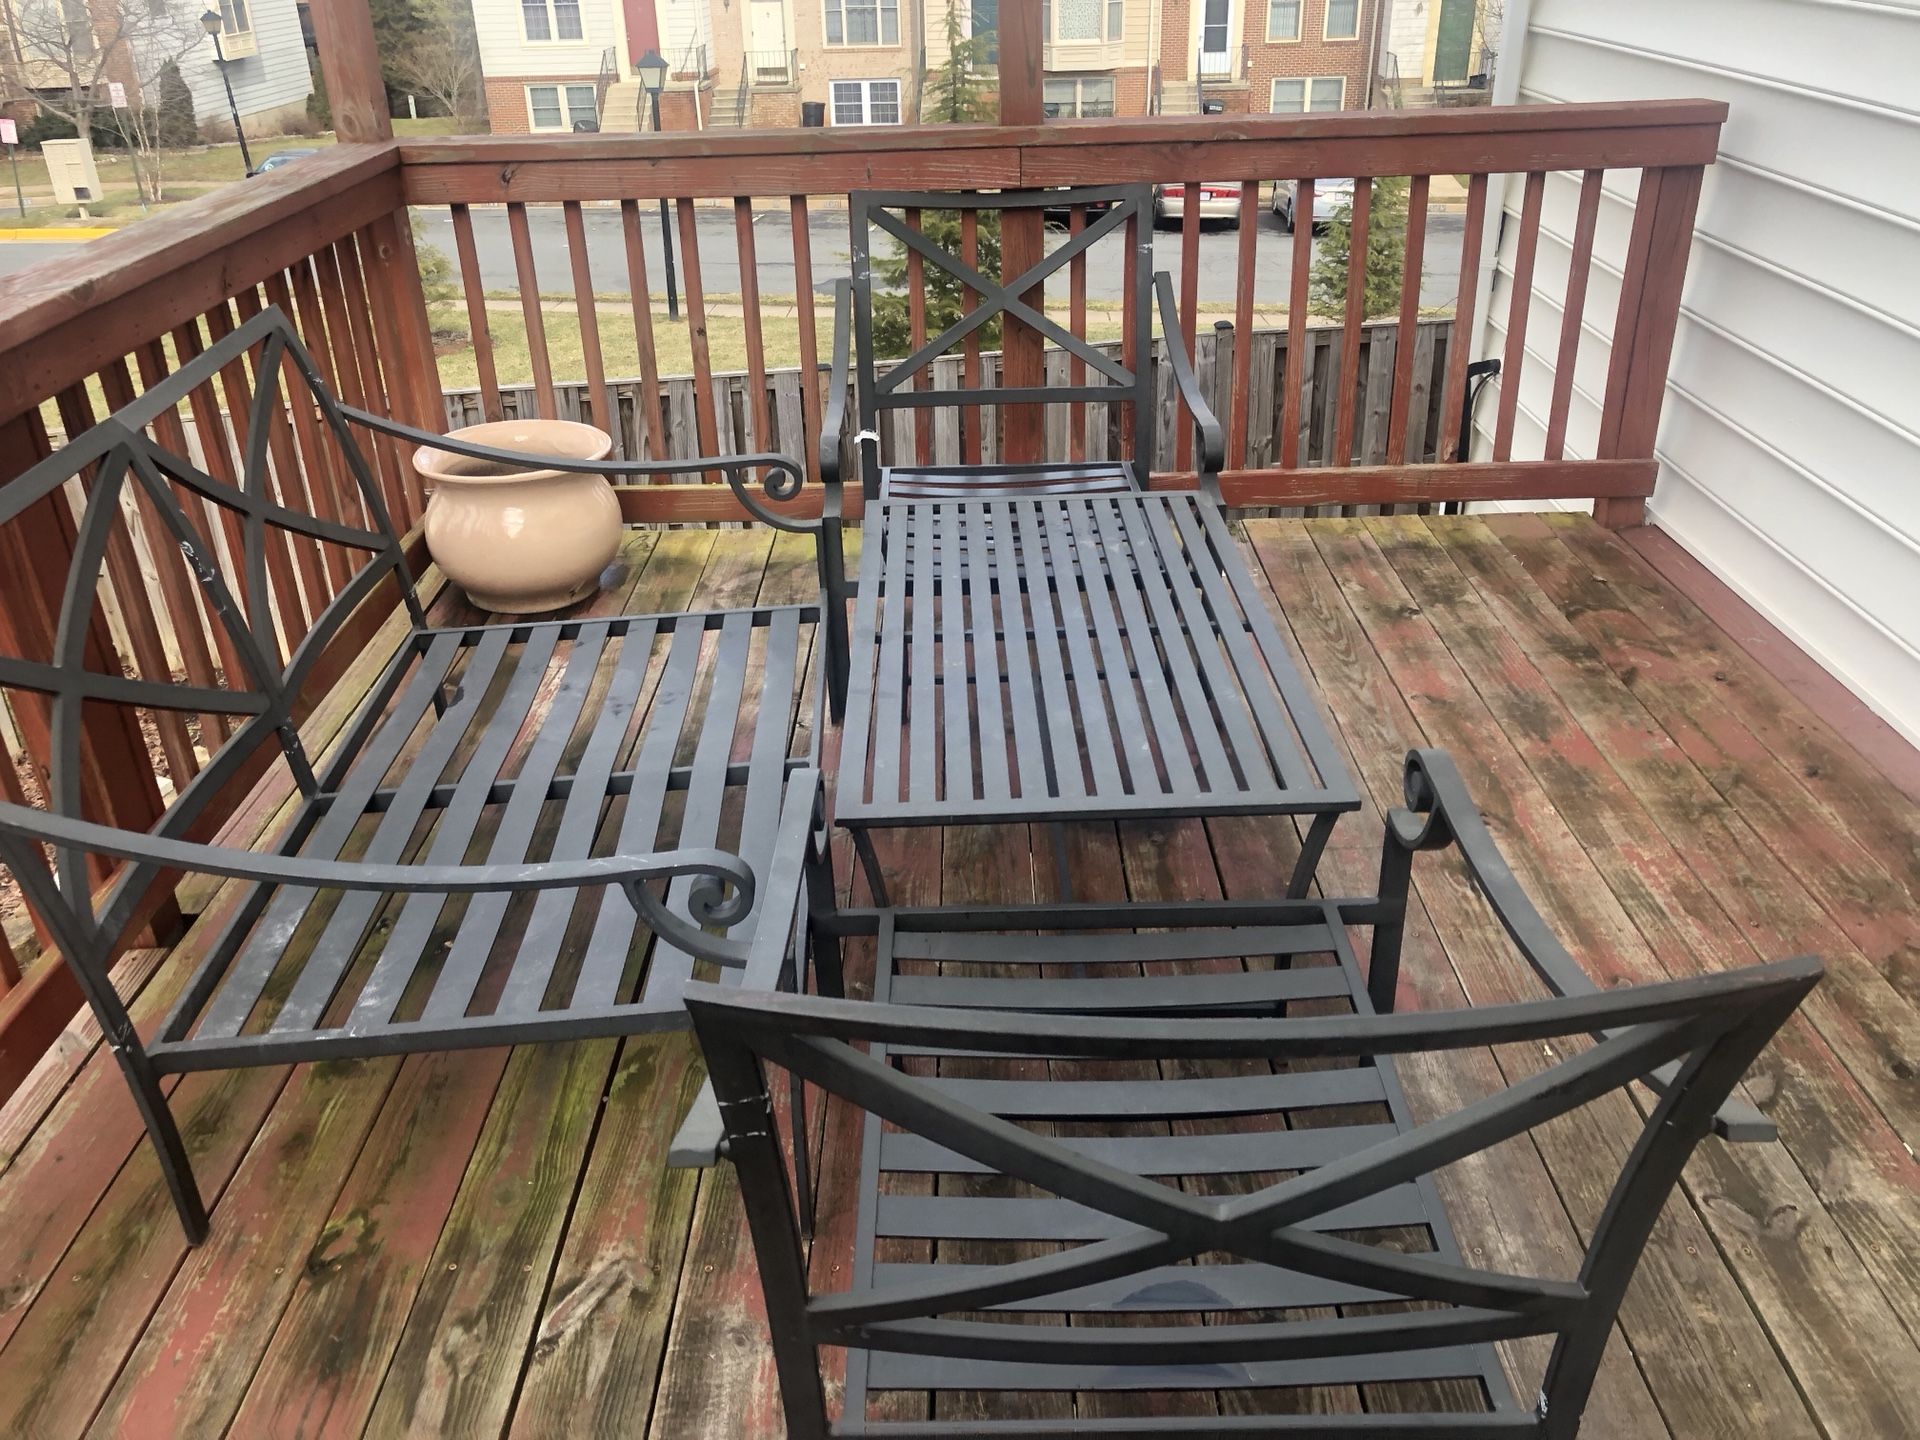 Patio furniture set with cushions, barely ever used good as new!